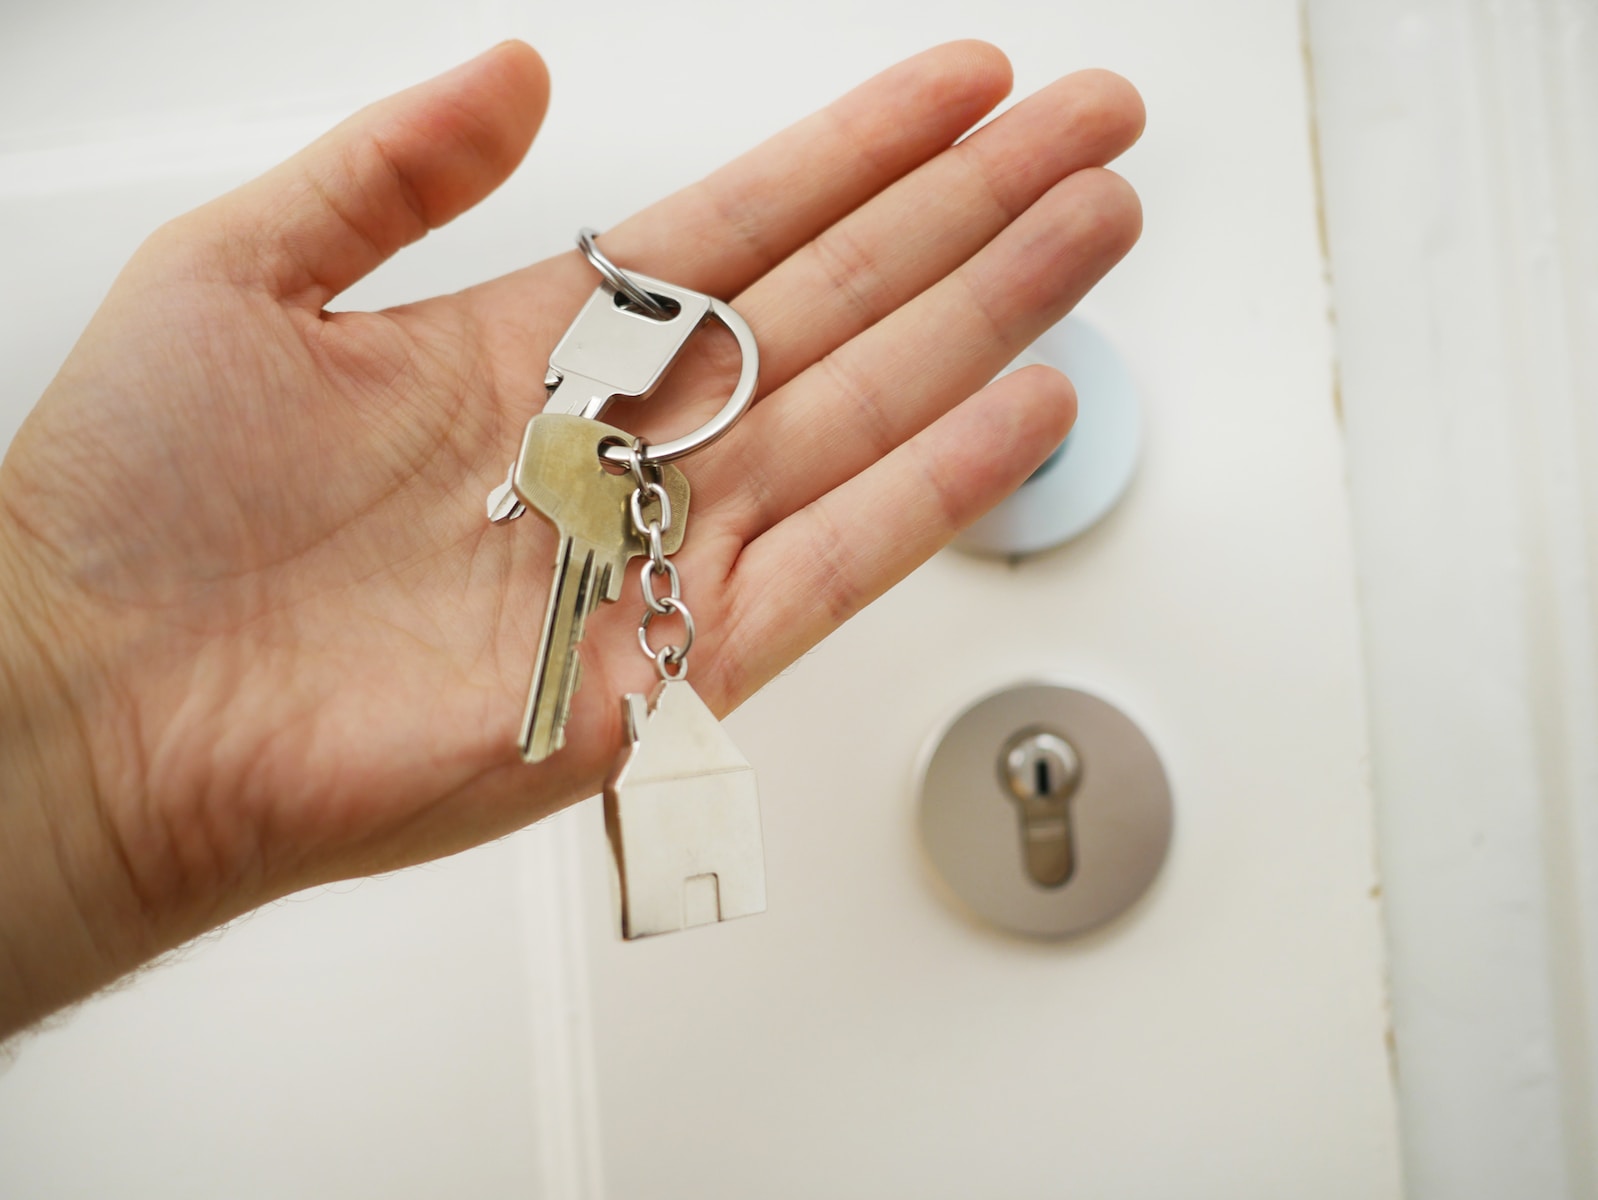 Emergency Locksmith in Charlotte: What to Know Before You Need One